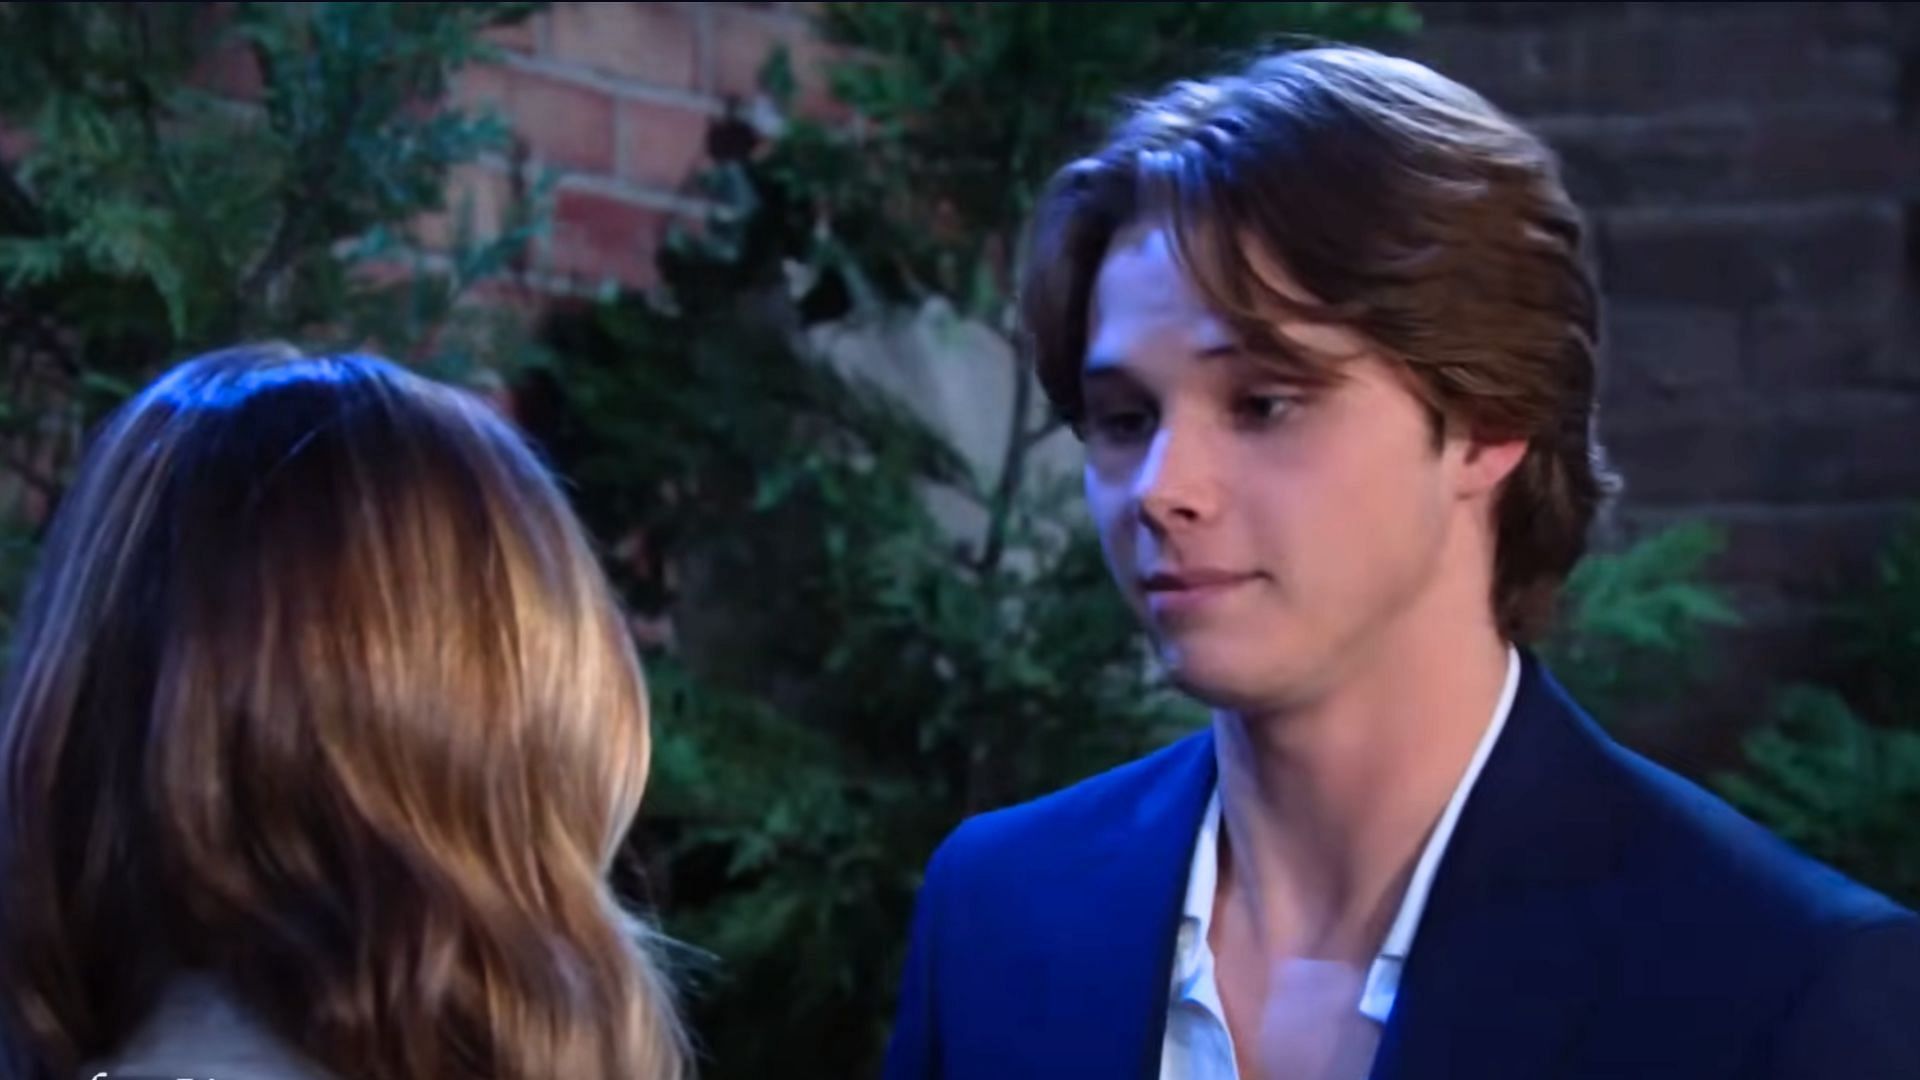 Tate has been pursuing Holly ever since meeting her in Salem (Image via YouTube@Days of Our Lives Promo)